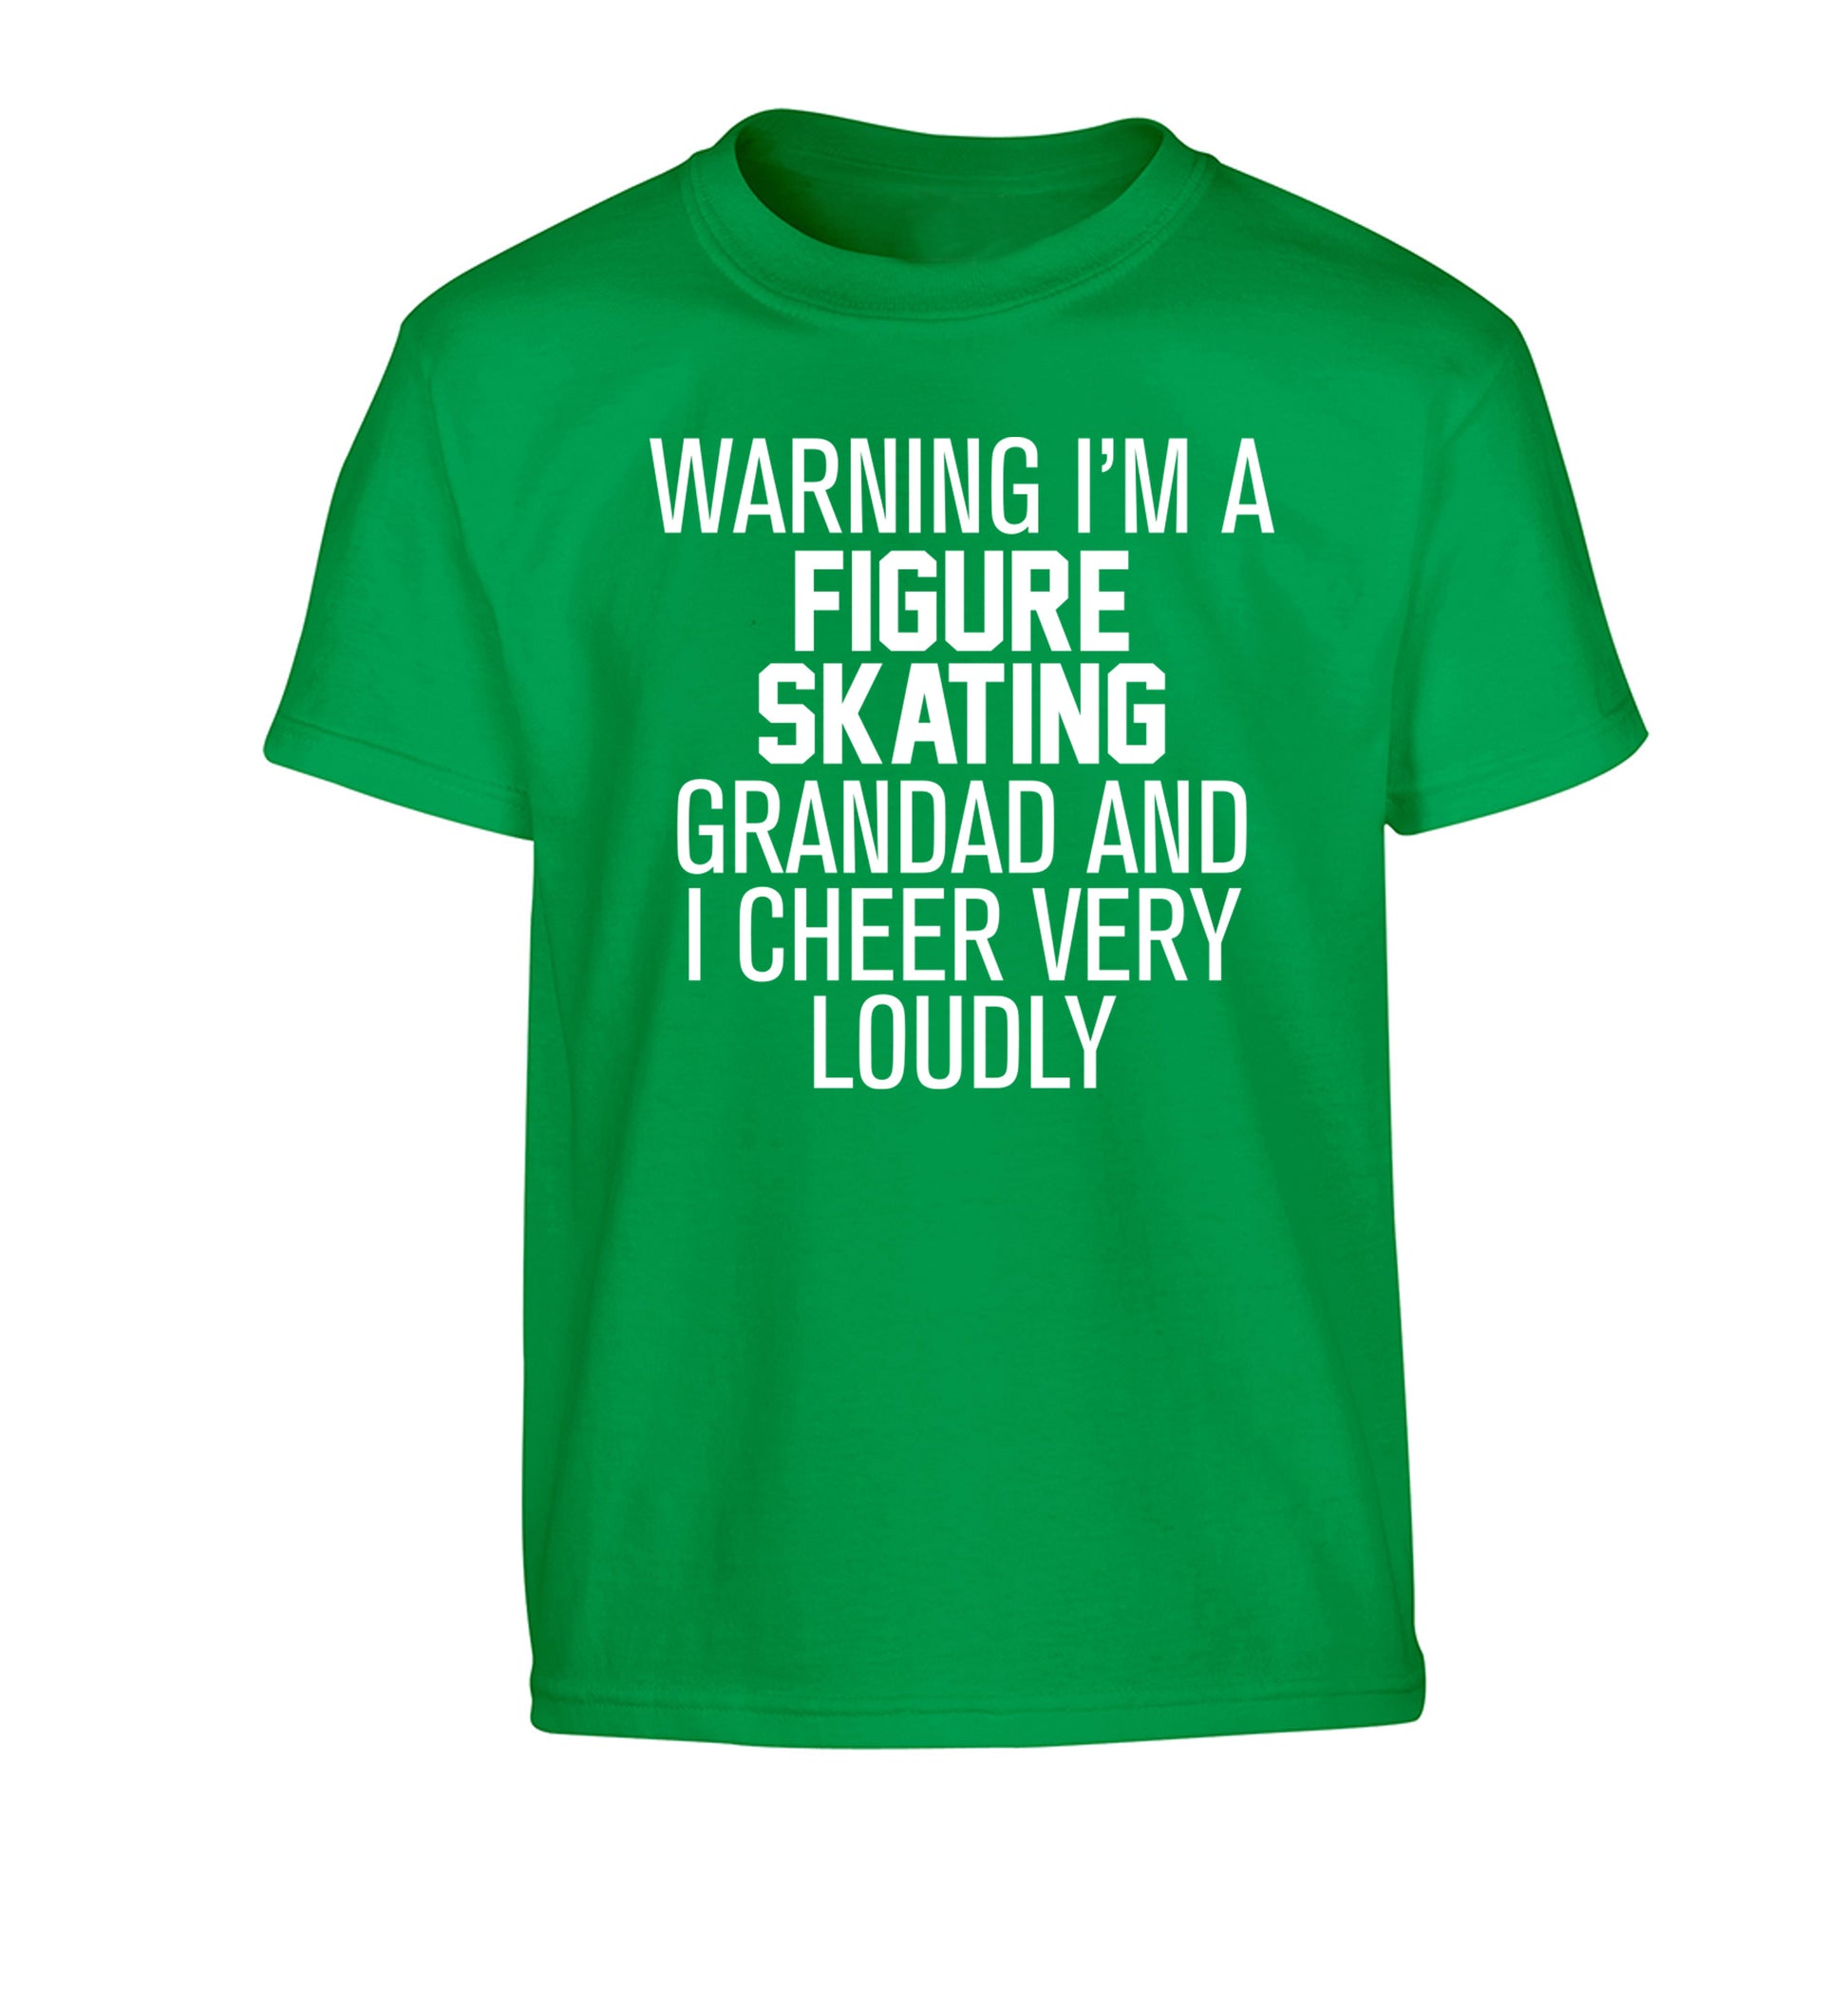 Warning I'm a figure skating grandad and I cheer very loudly Children's green Tshirt 12-14 Years